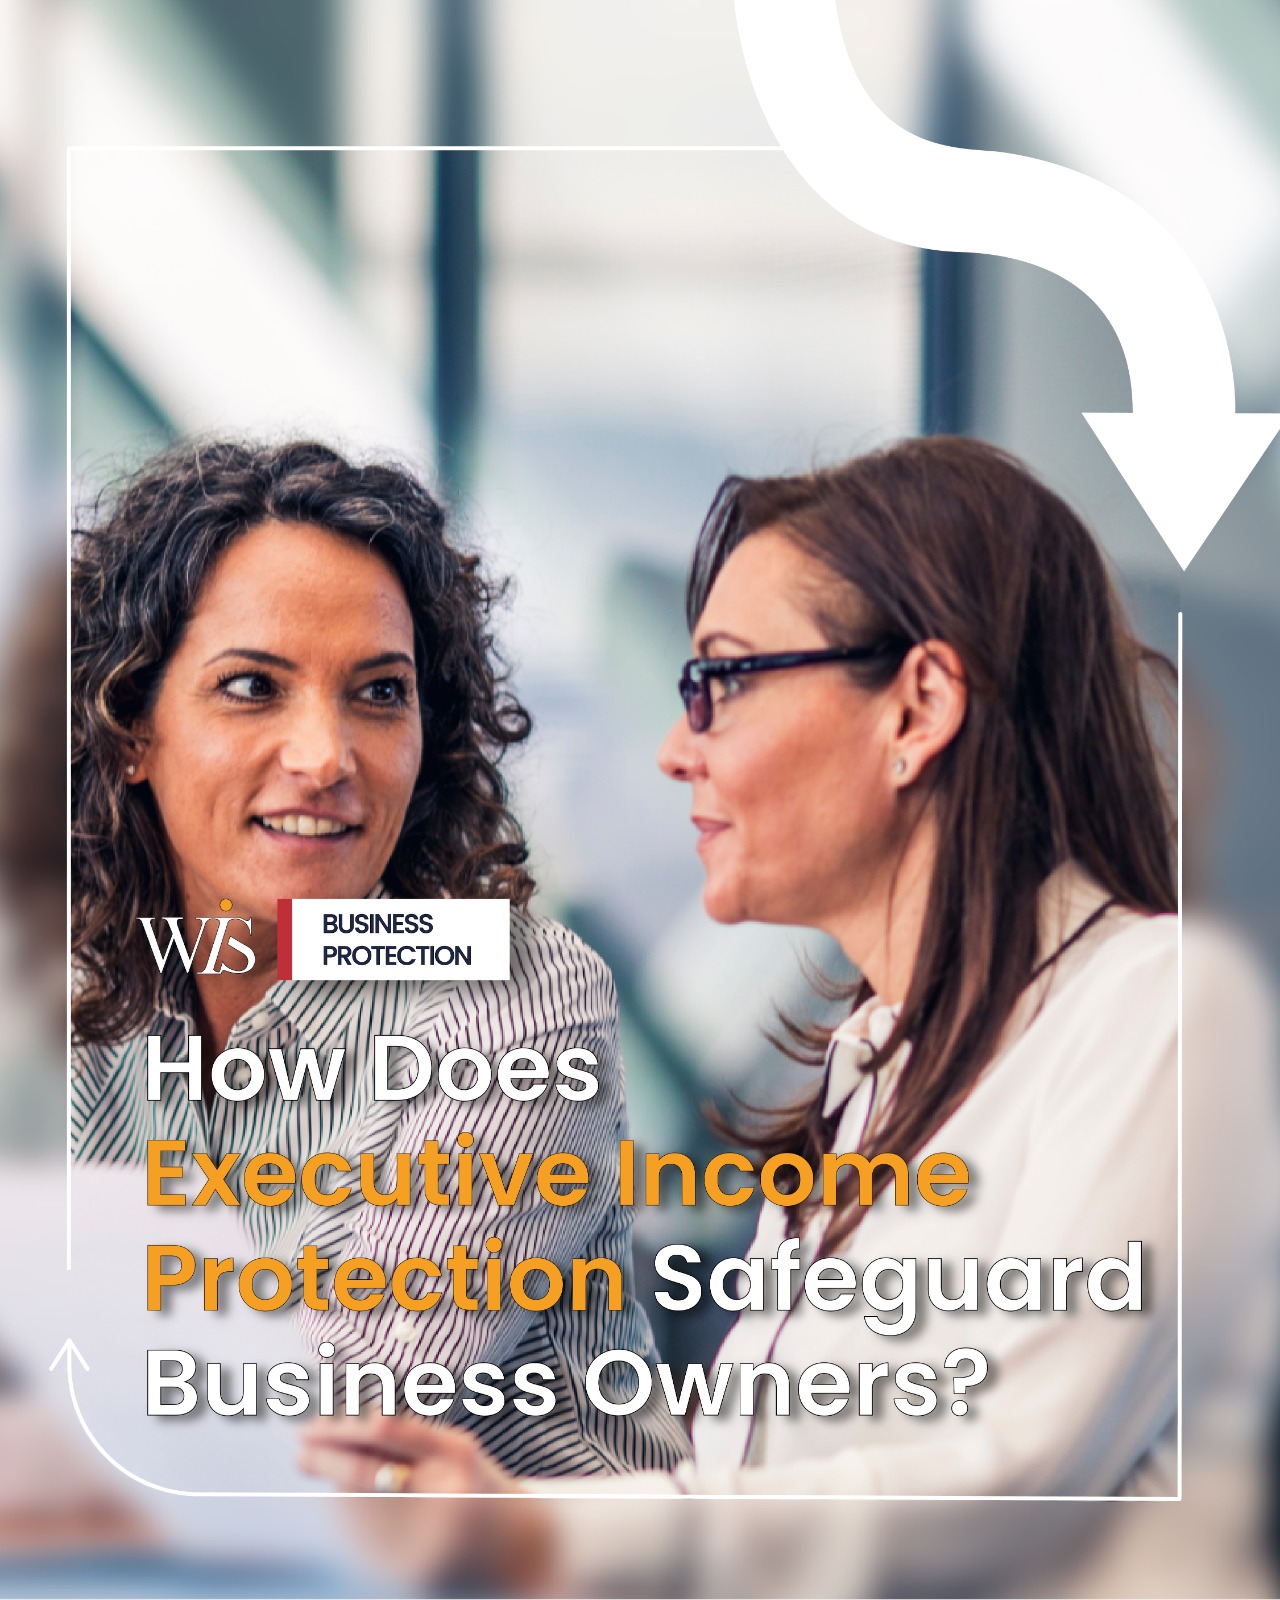 How Does Executive Income Protection Safeguard Business Owners